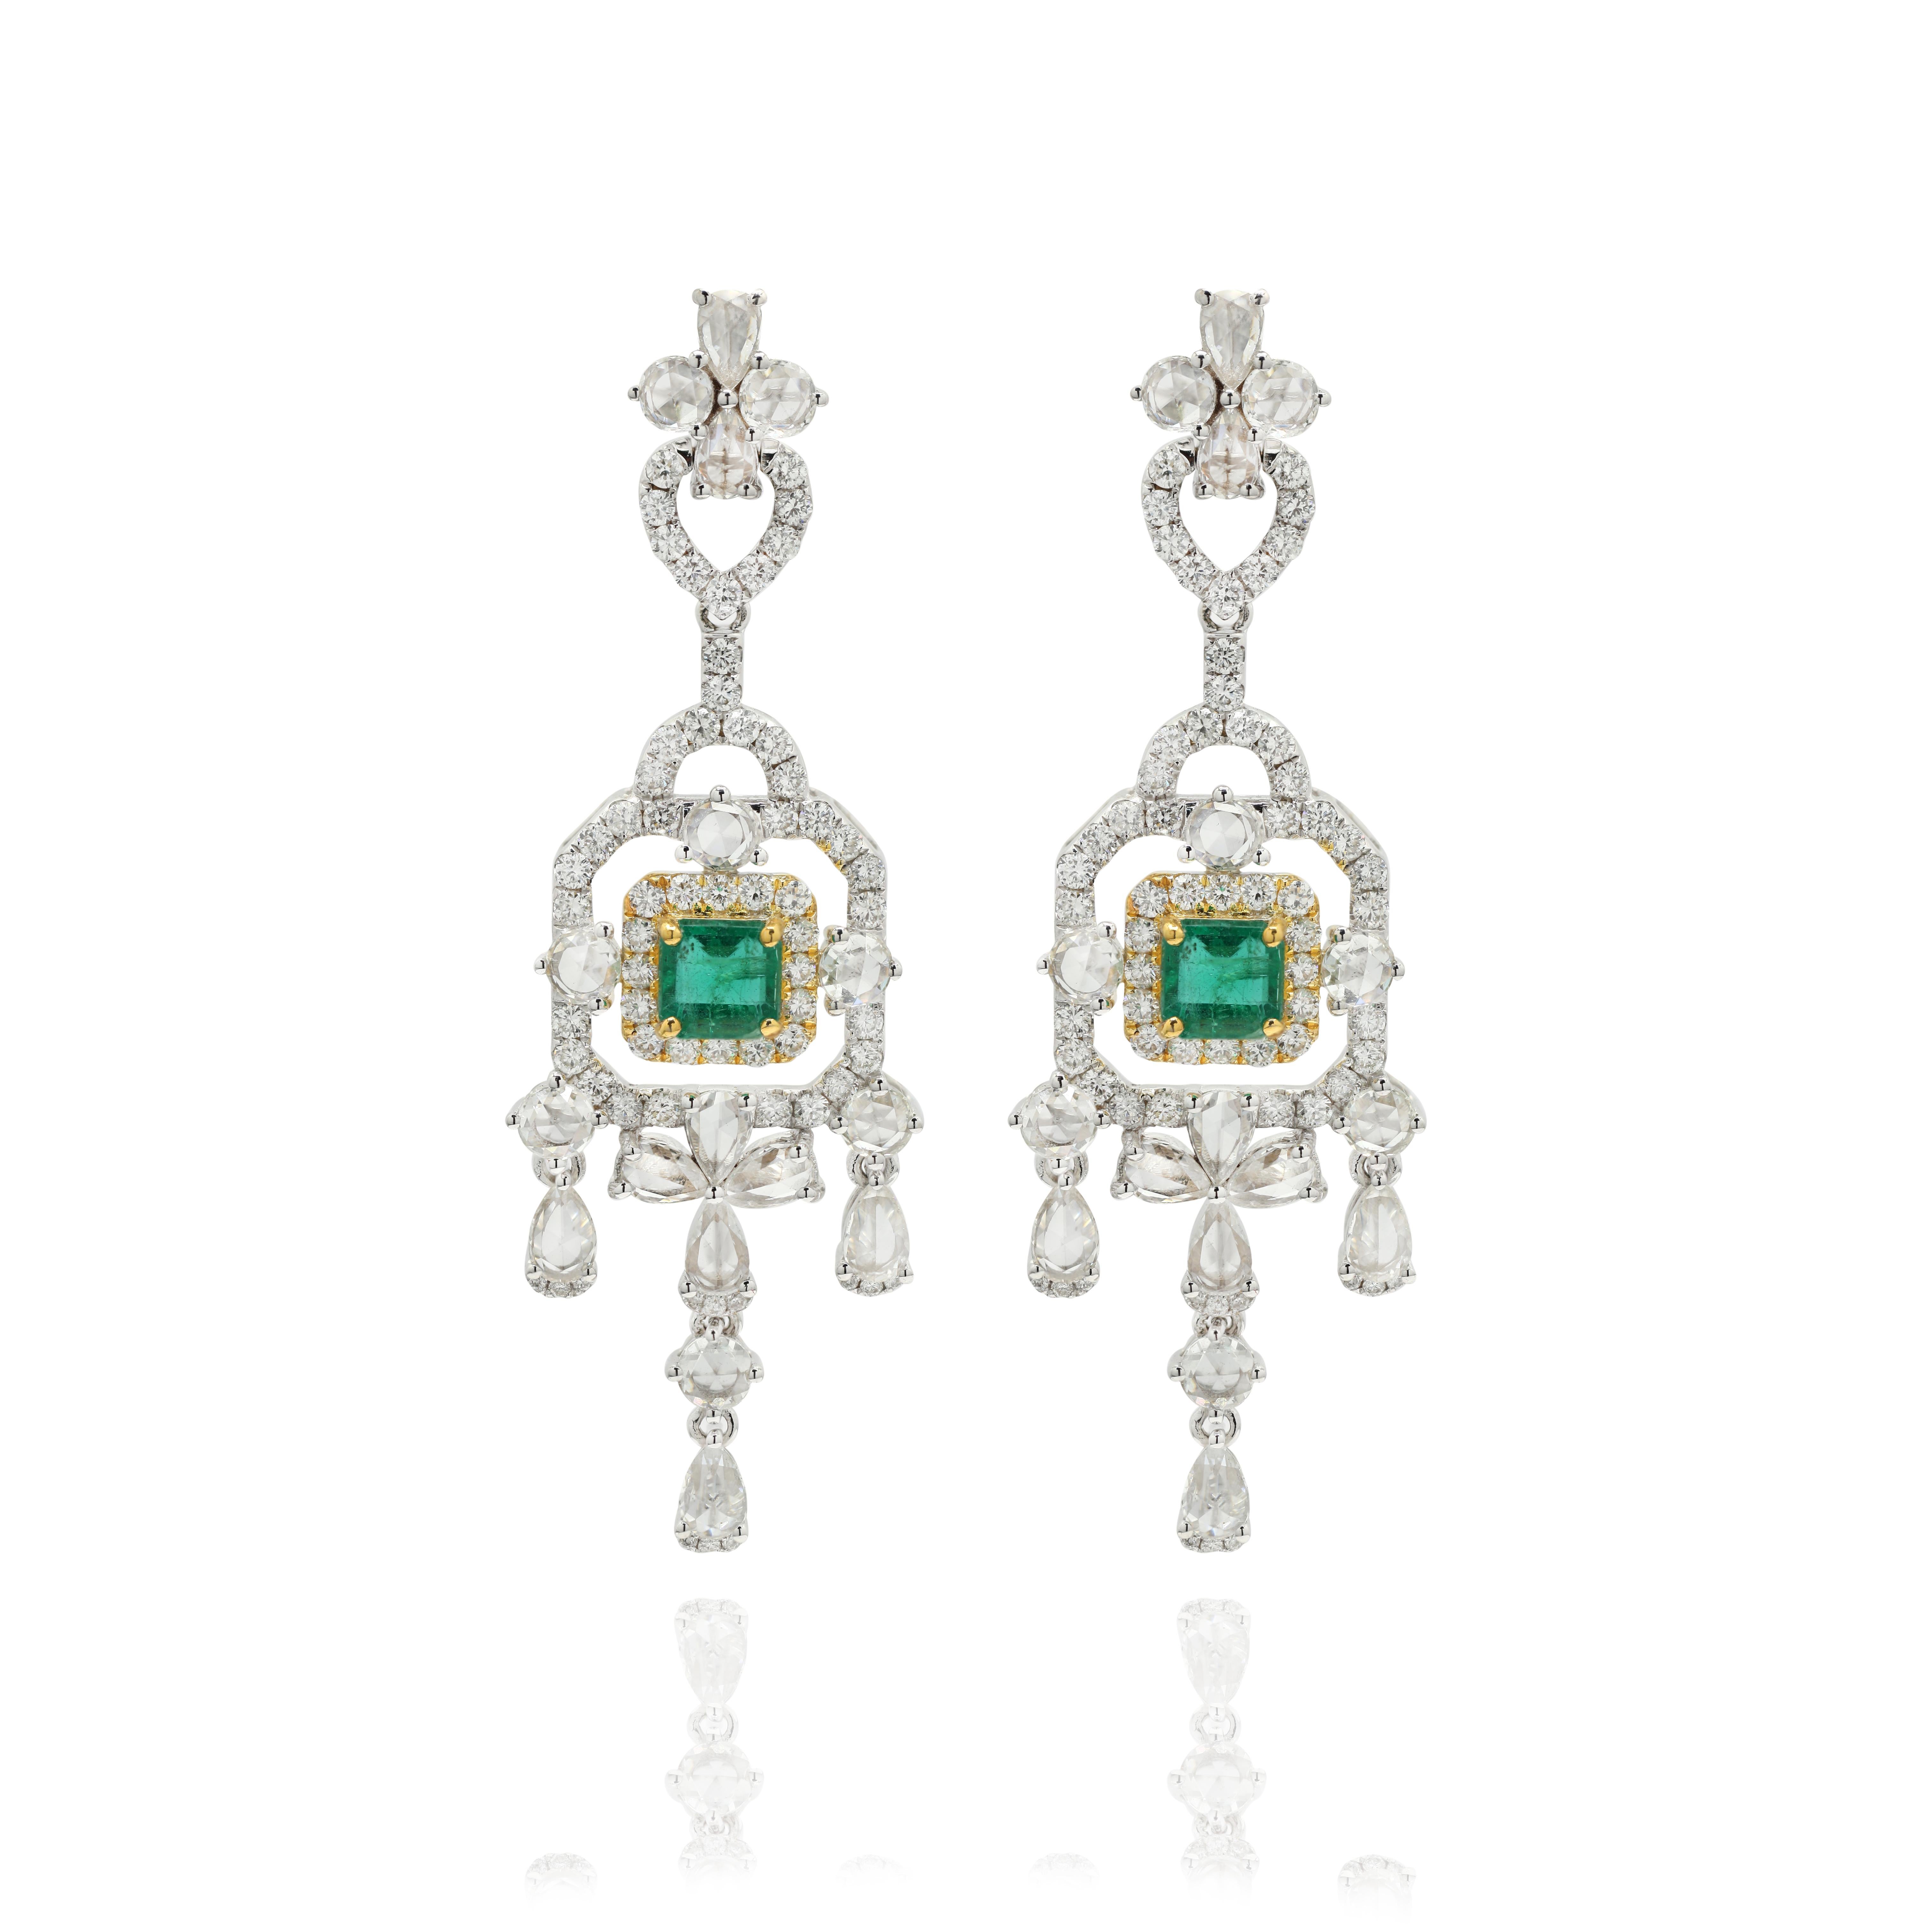 Emerald and diamond chandelier earrings to make a statement with your look. These earrings create a sparkling, luxurious look featuring octagon cut gemstone.
If you love to gravitate towards unique styles, this piece of jewelry is perfect for